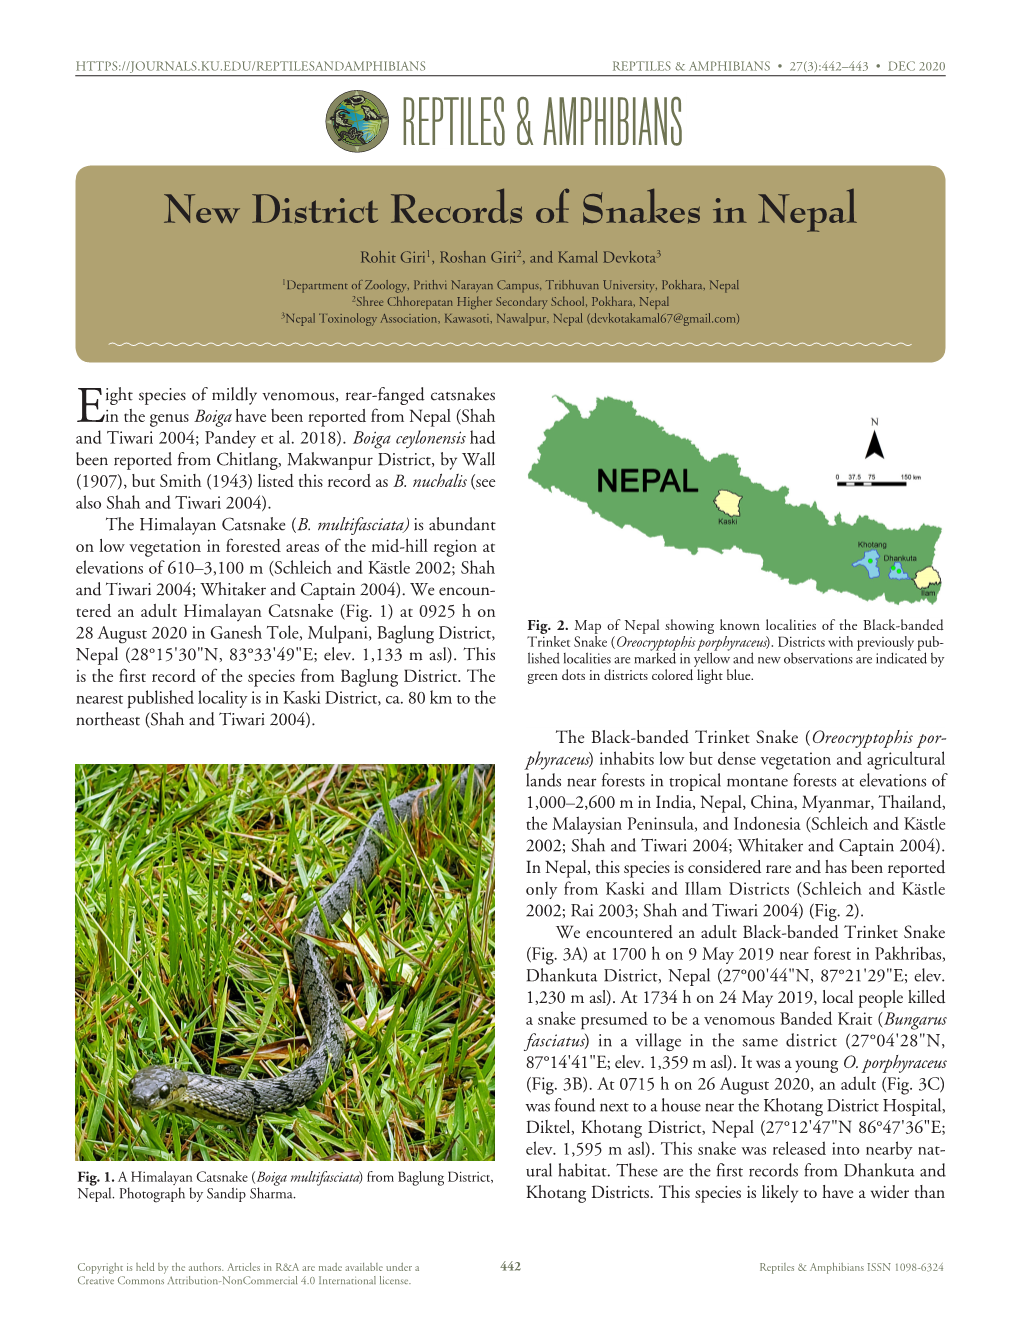 New District Records of Snakes in Nepal